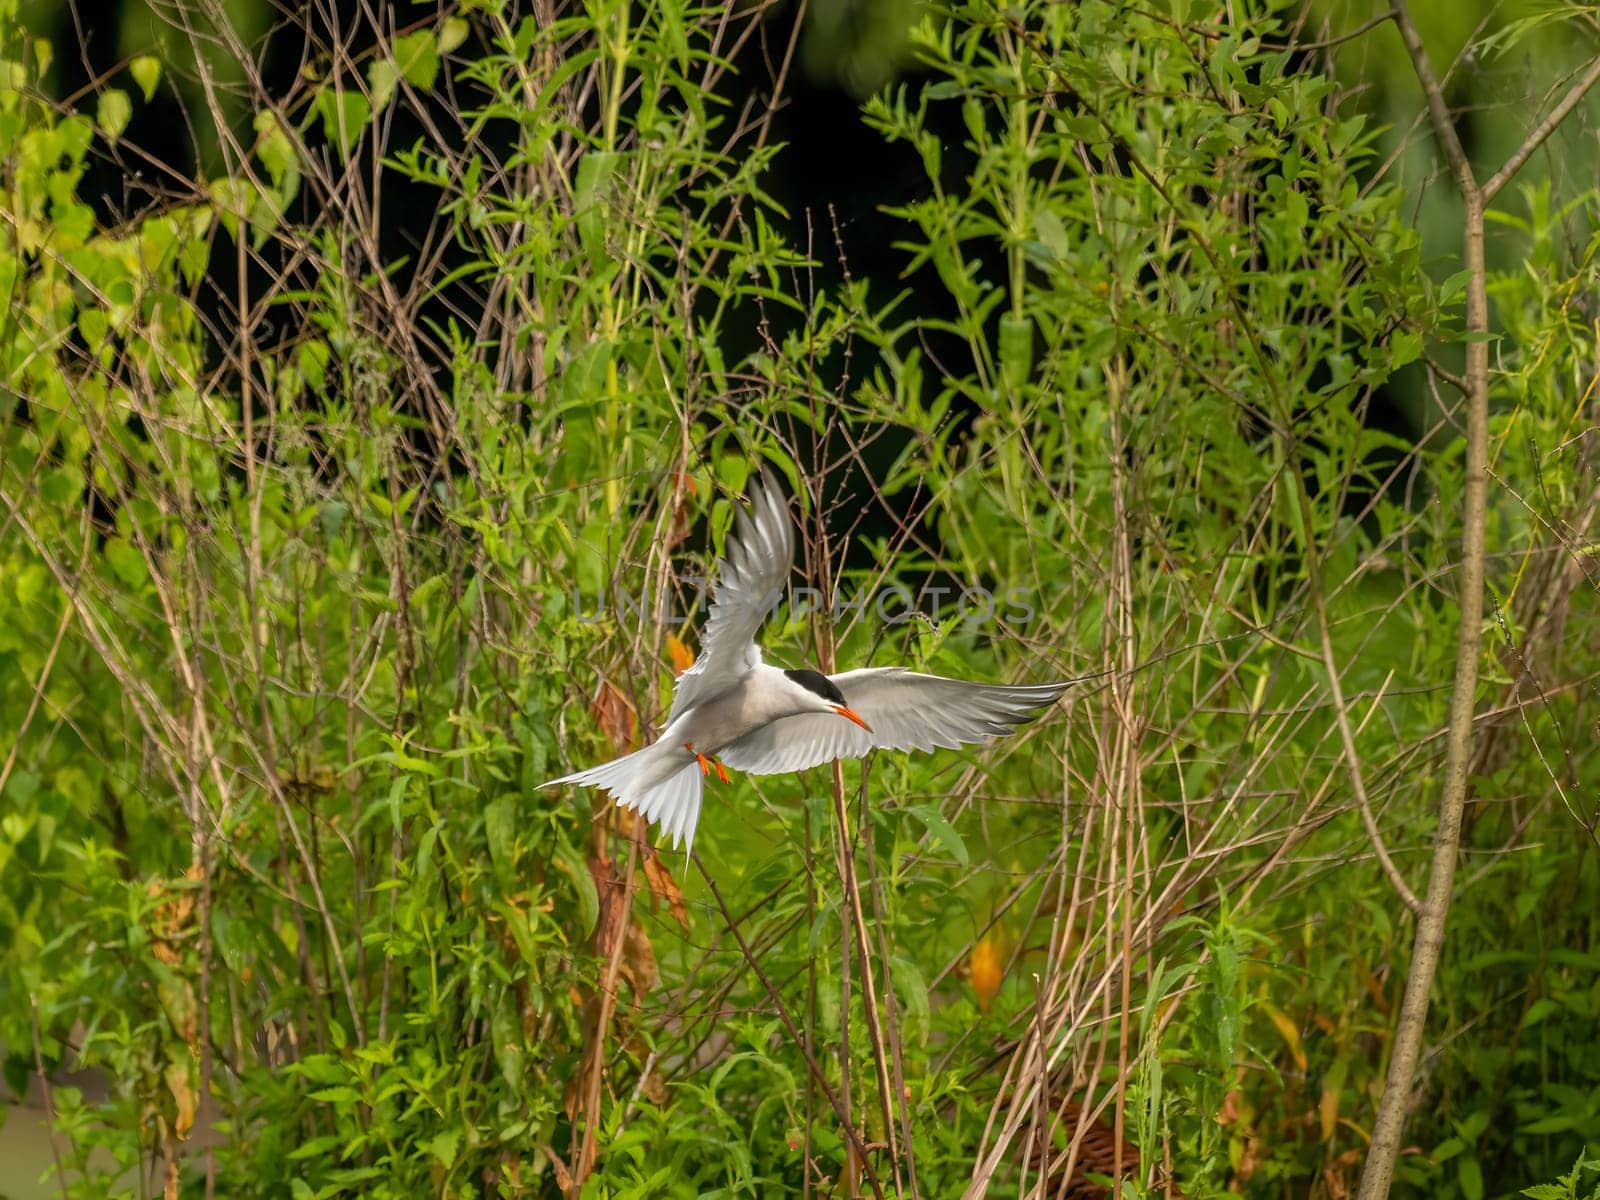 Common Tern gracefully soars through the air against a lush green backdrop, embodying the beauty of nature in motion.